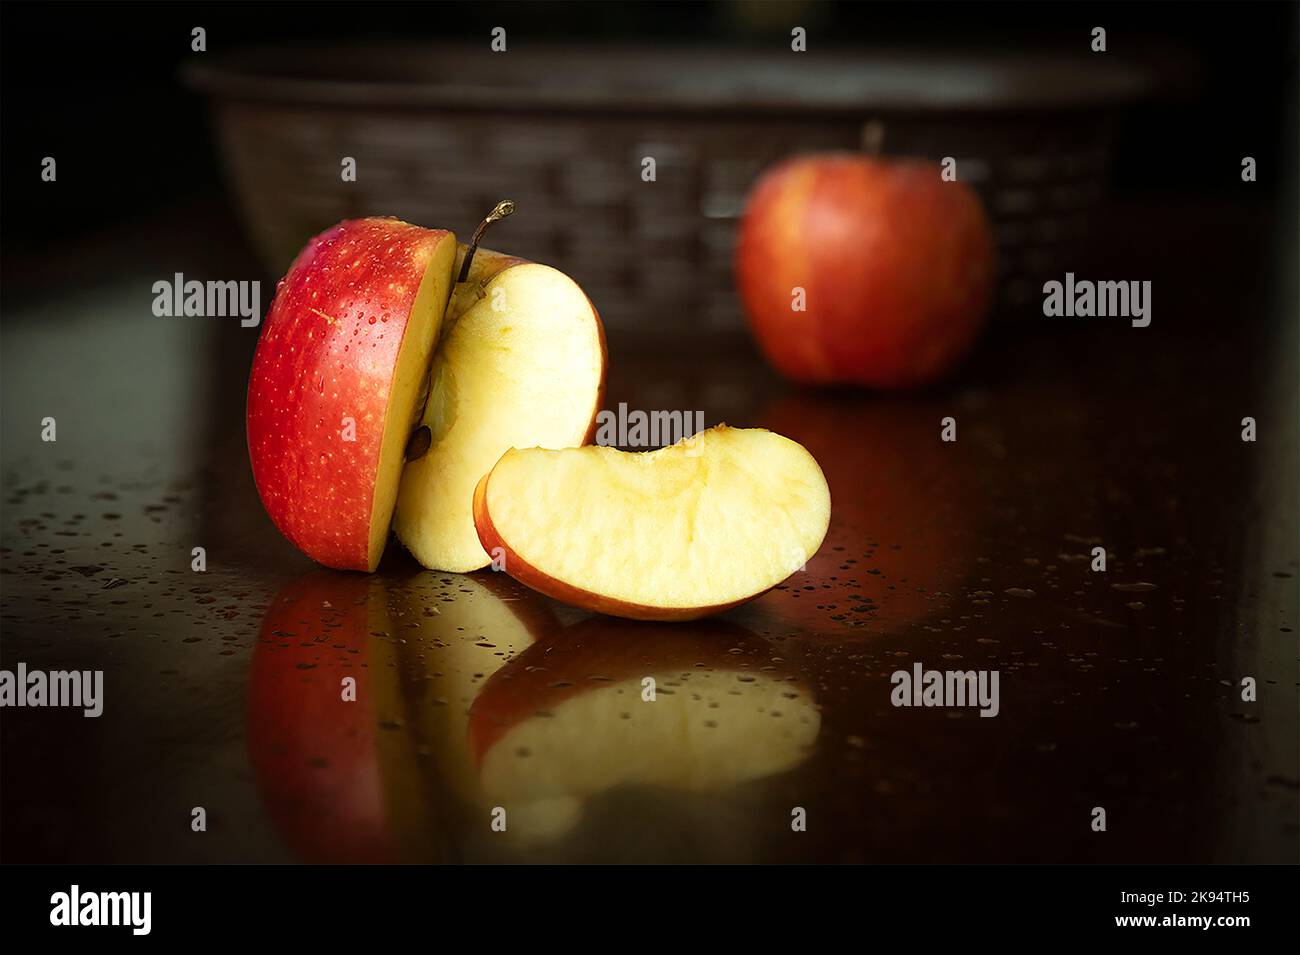 Cut peace apple on a brown table Stock Photo